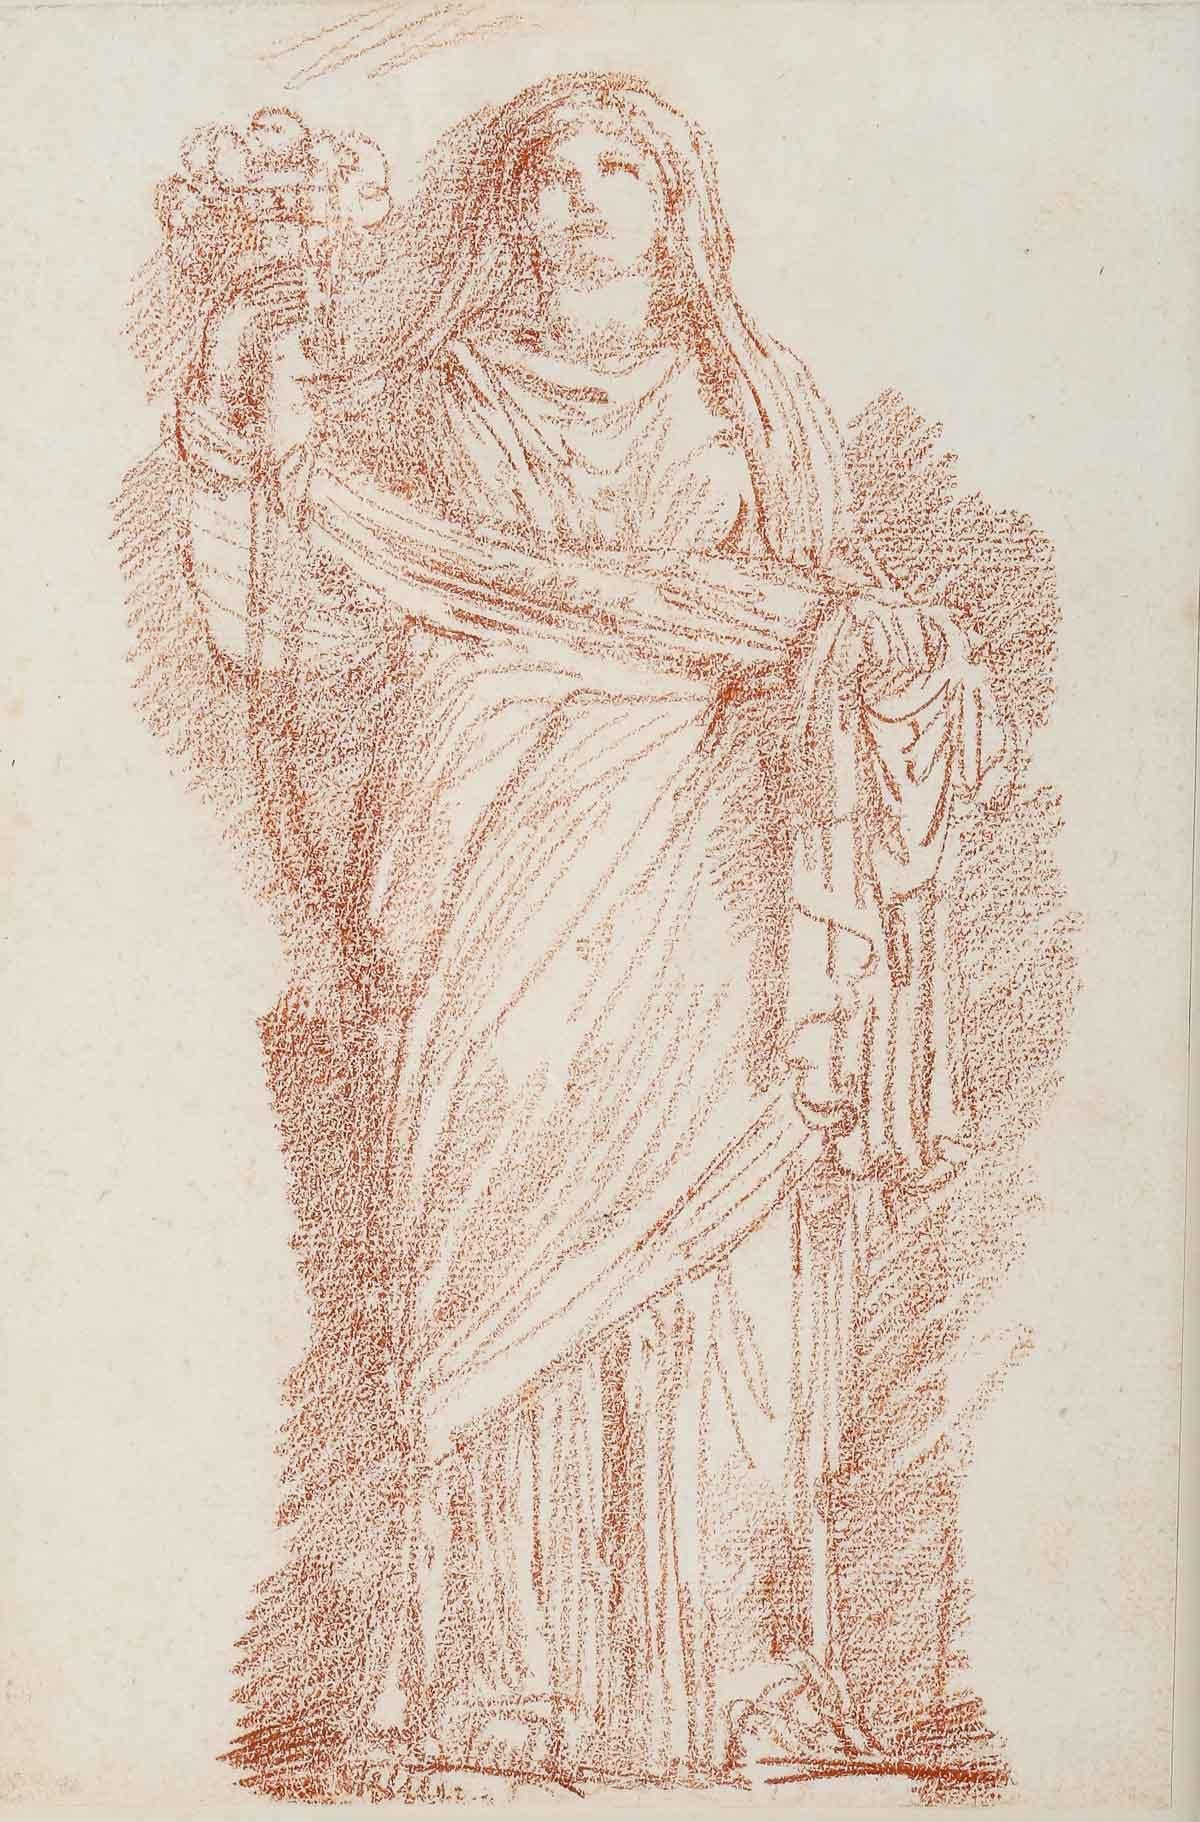 Sanguine on Paper by Jean Robert Ango (1710-1773), XVIIIth Century.

Sanguine, drawing of a woman with a bouquet of flowers, on framed paper from the 18th century by Jean Robert Ango .

Drawing: H: 27.8cm, W: 20.5cm
Framed: H: 36cm, W: 28cm, d: 1cm